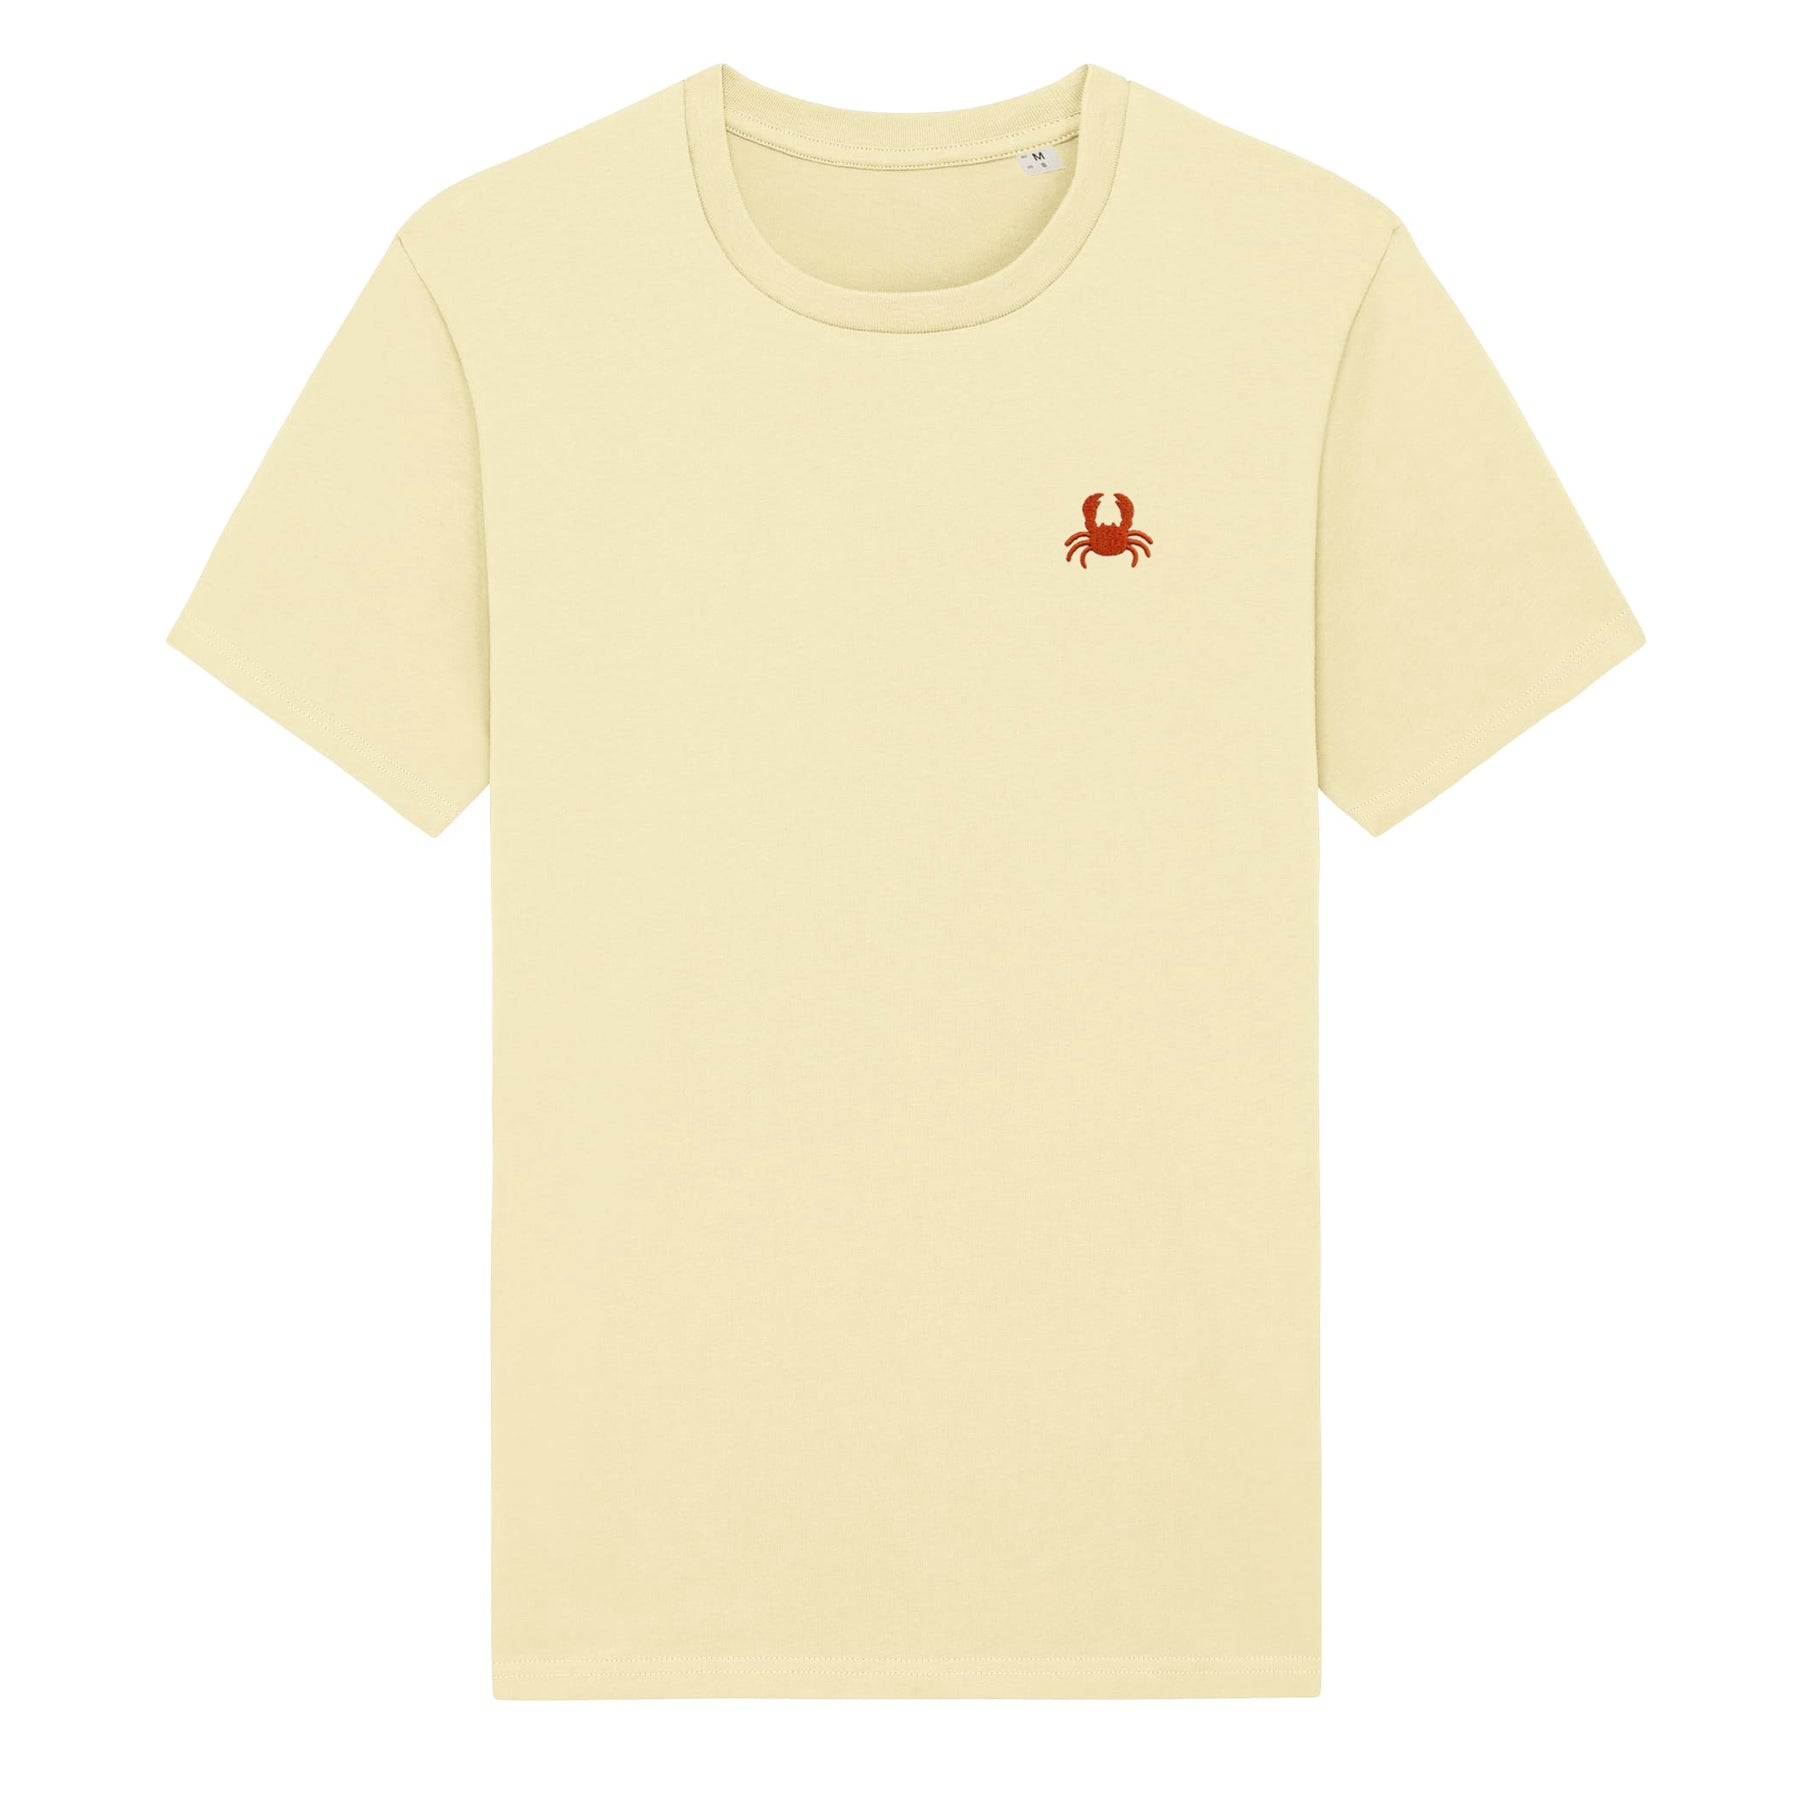 Yellow T-Shirt. Embroidered Crab